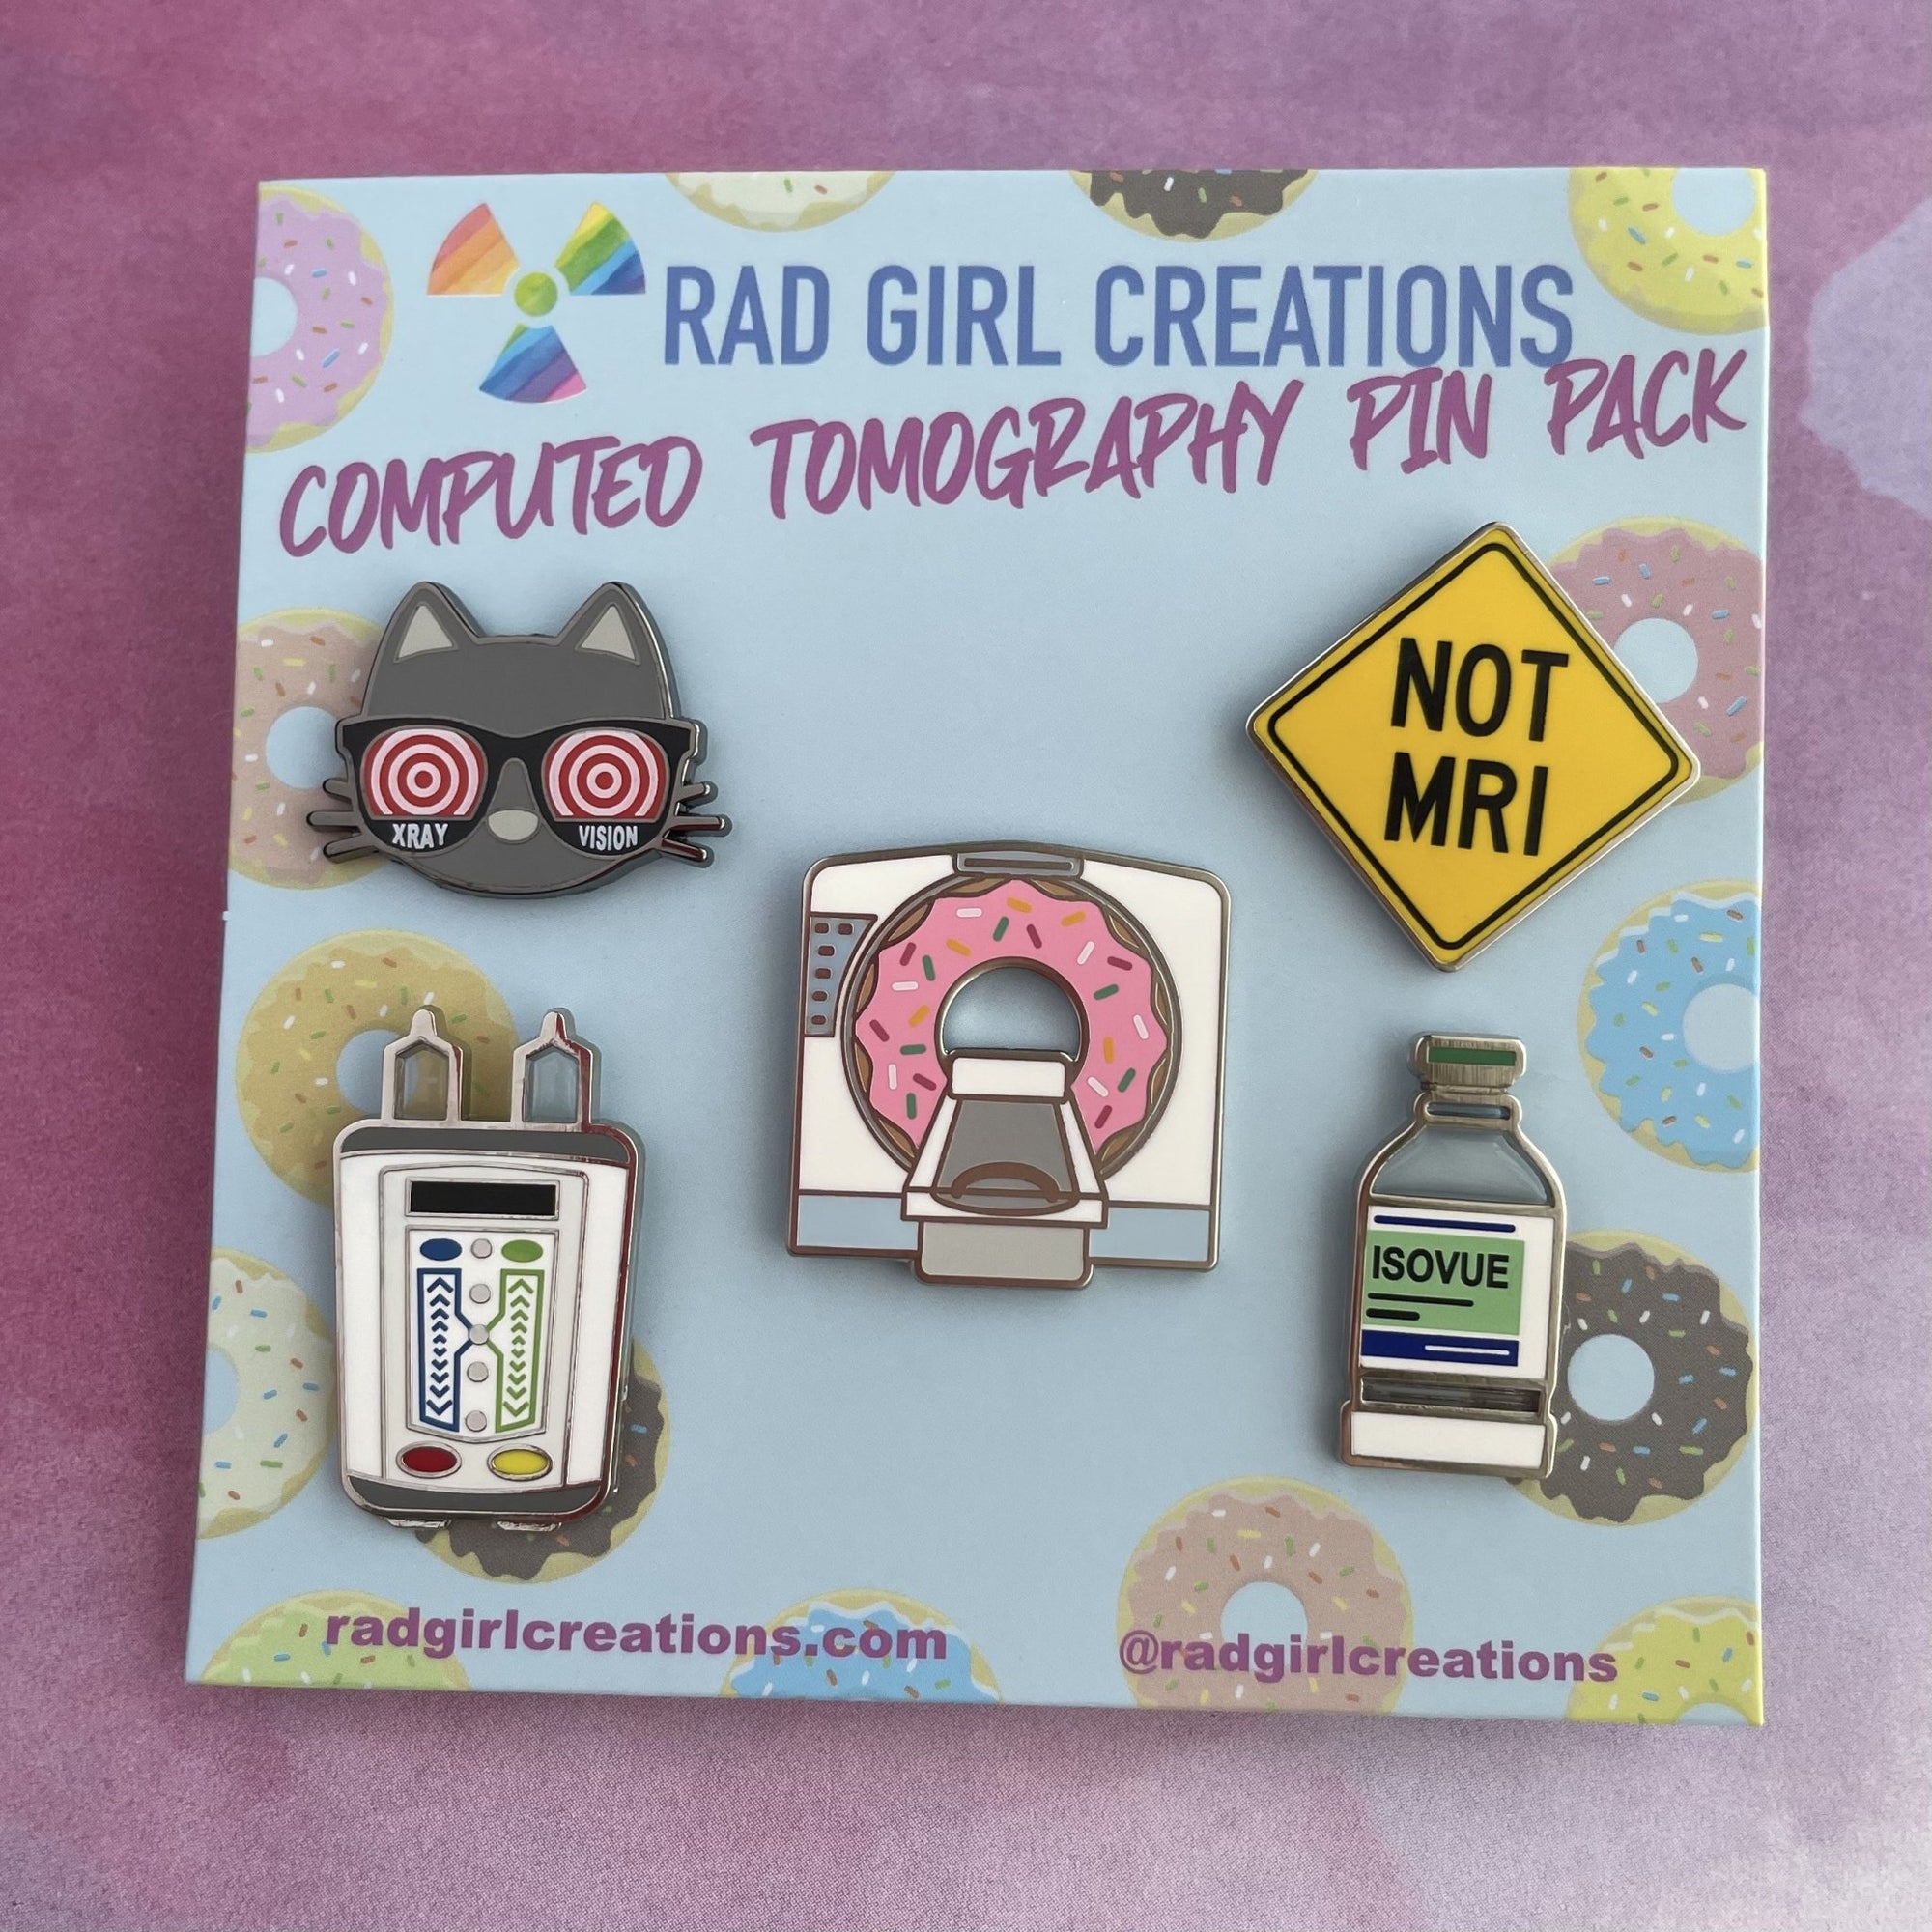 Computed Tomography Pin Pack - Rad Girl Creations